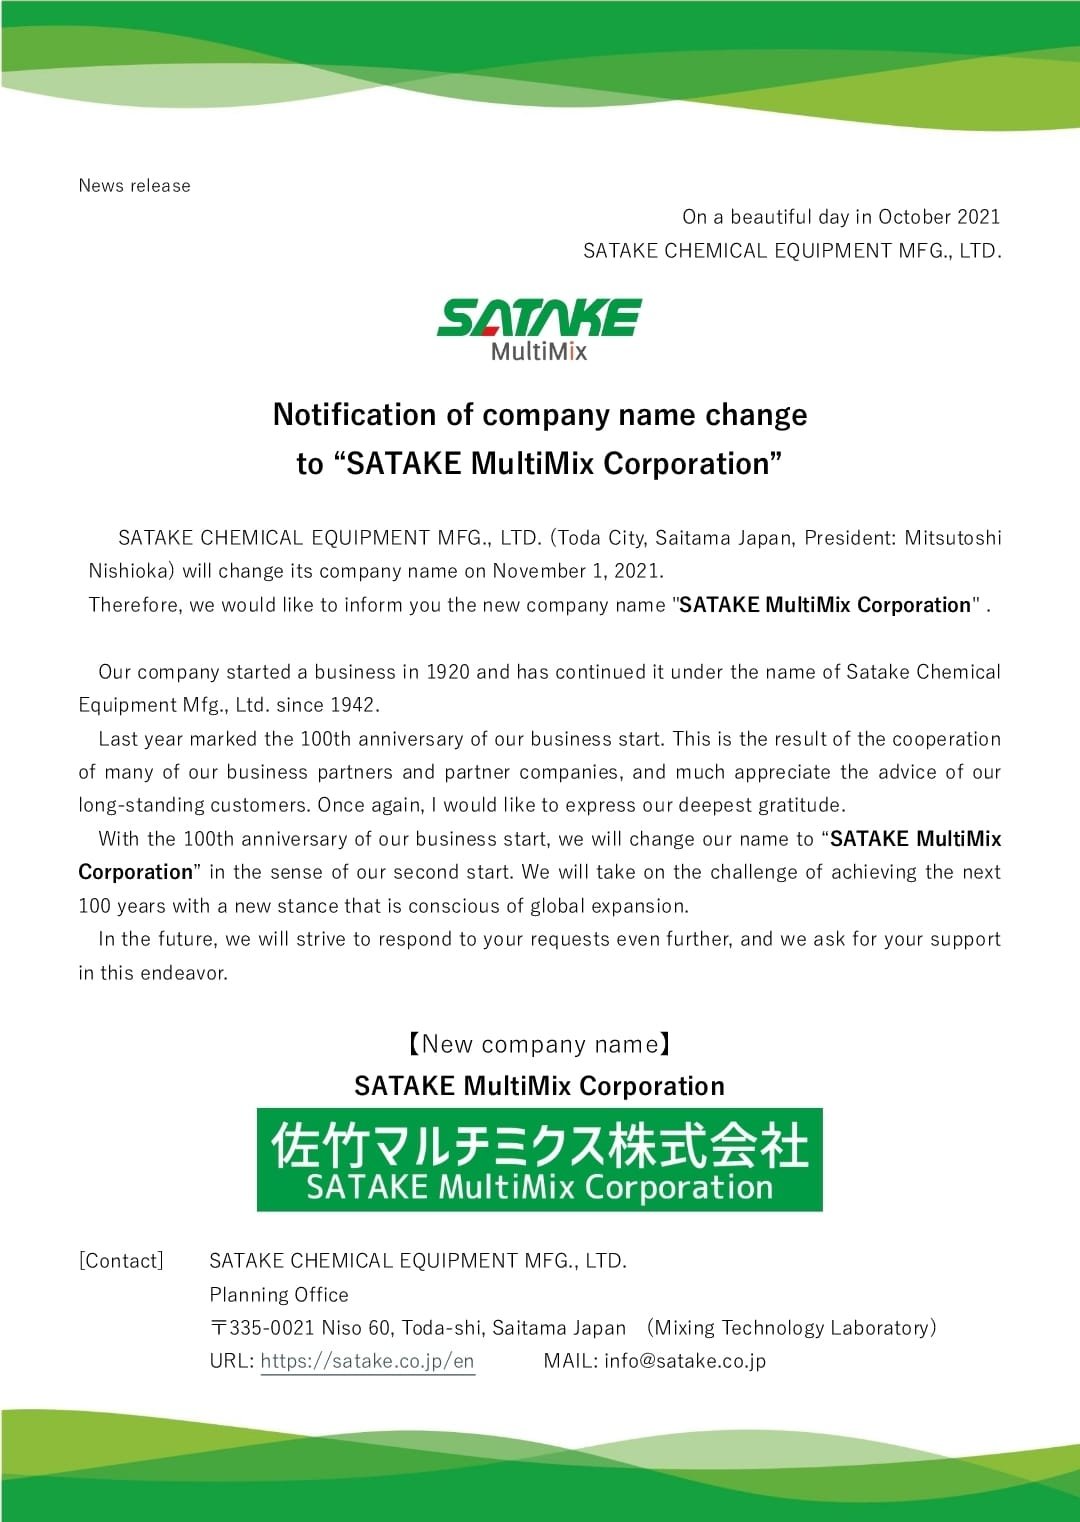 Notice of Parent Company Name Change